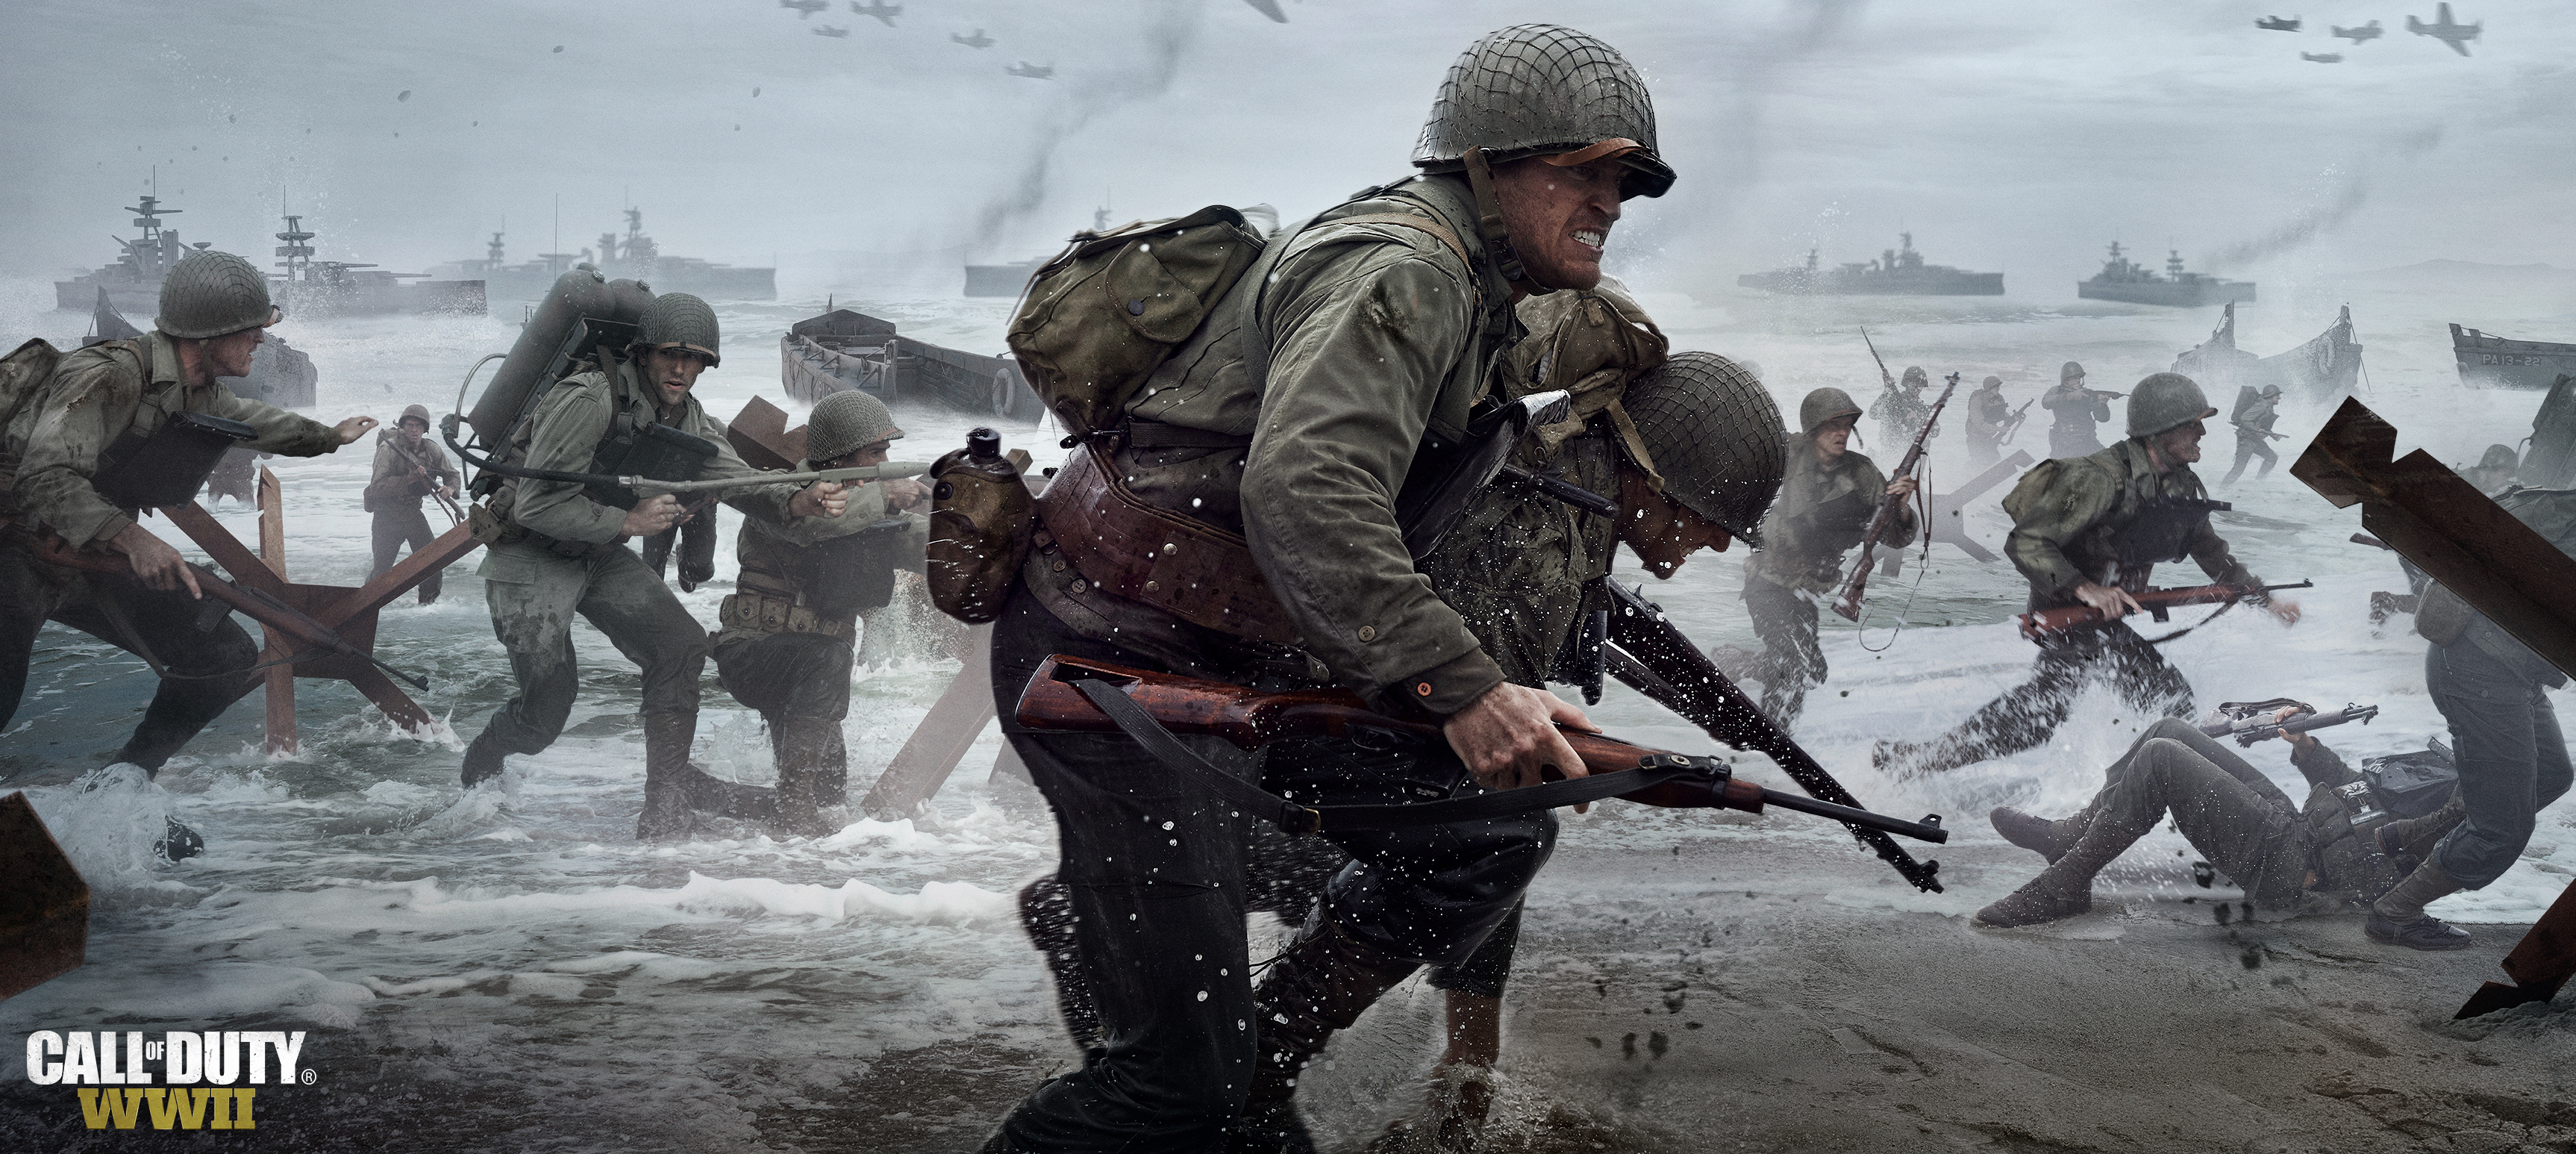 3452x1546 20+ Call of Duty: WWII HD Wallpapers and Backgrounds